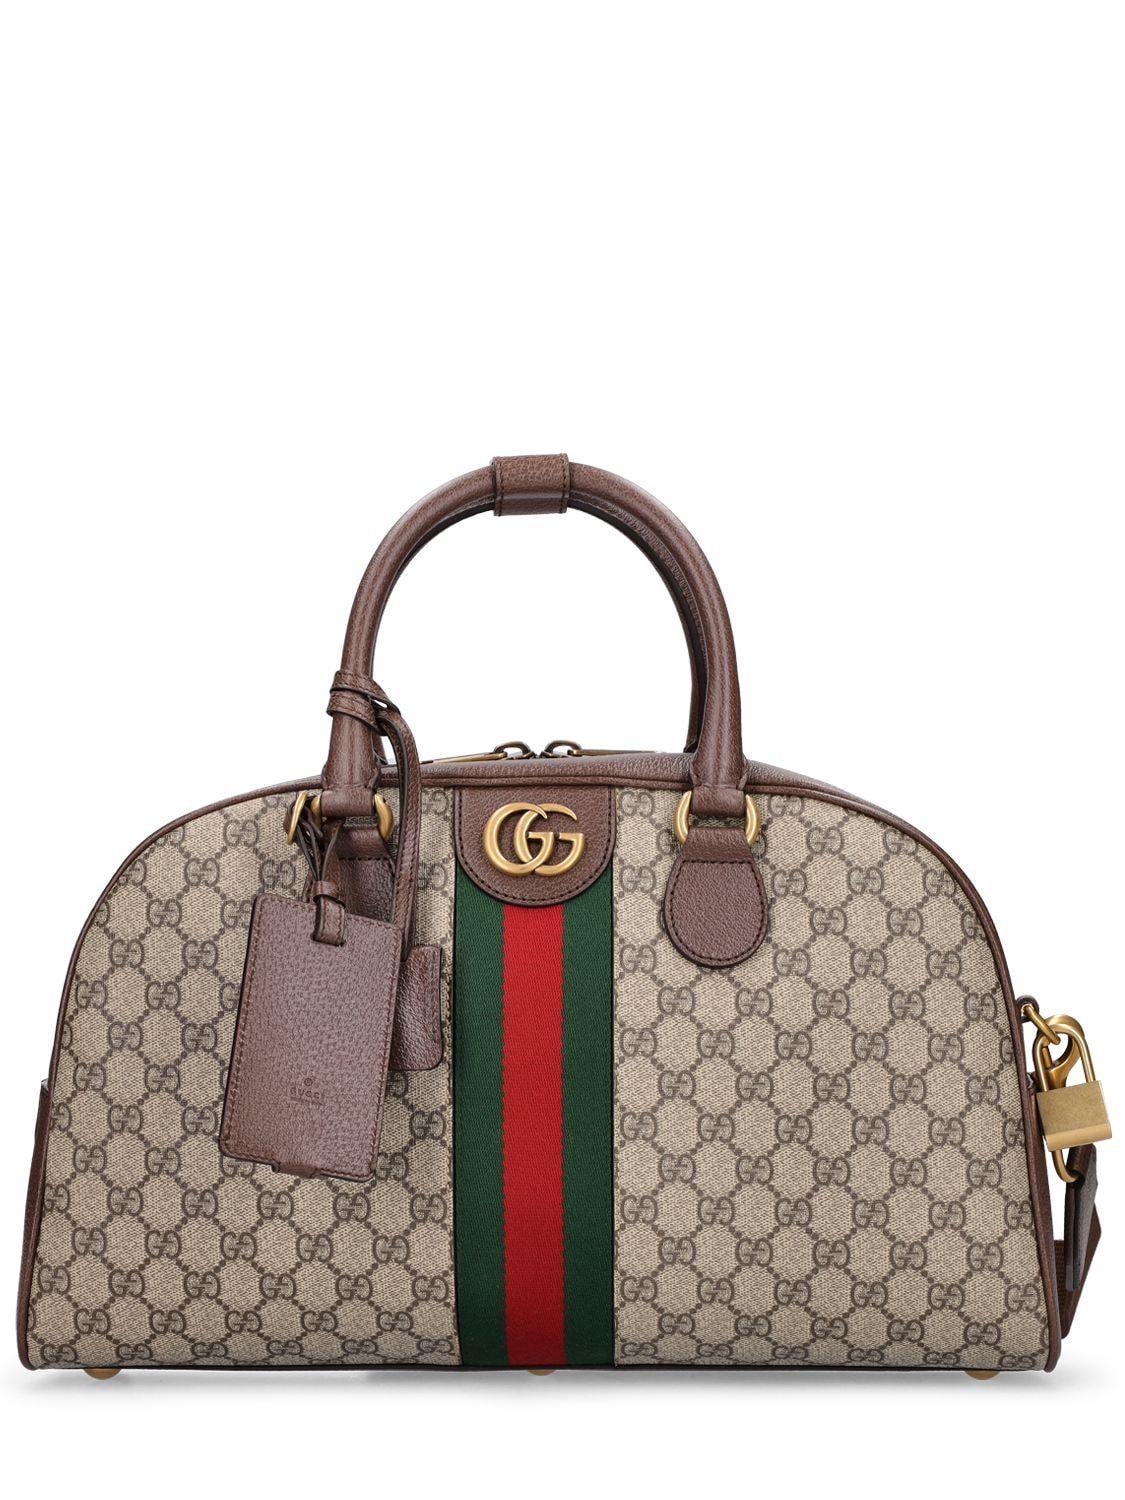 Gucci Savoy & Ophidia Duffle Bag - Small / Beige+Blue